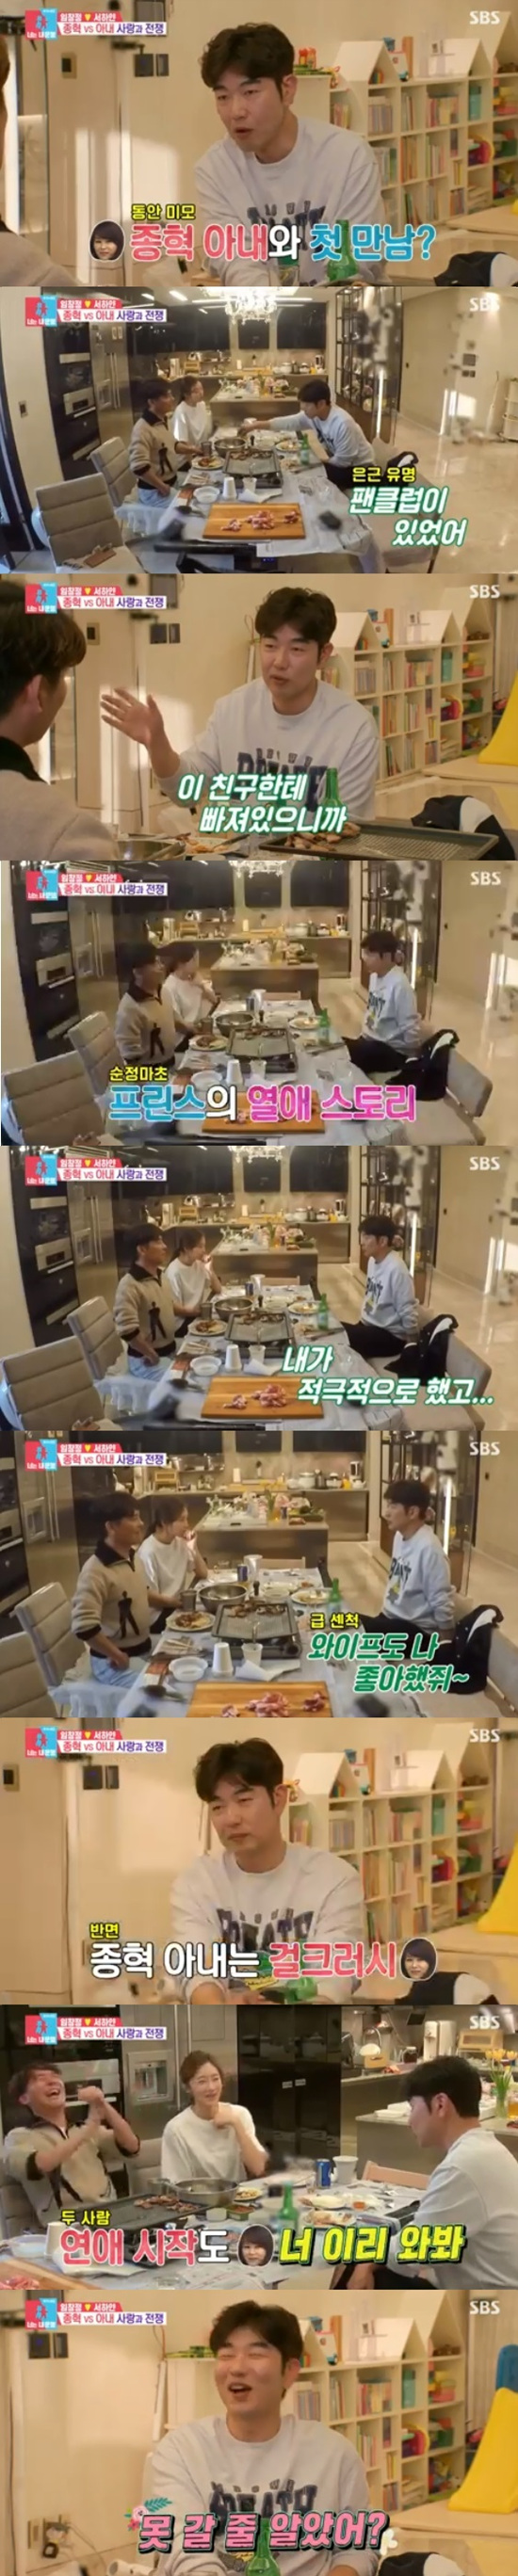 On SBS Same Bed, Different Dreams 22 - You Are My Destiny broadcast on the 18th, Lee Jong-hyeok revealed his first meeting with his wife and attracted attention.Lee Jong-hyeok visited the house of Im Chang-jung on the day.Im Chang-jung, along with Lee Jong-hyeok, tried to propose a meat-house partnership to buy pork by part.Lee Jong-hyeok said that he should talk to his wife at first, and he told me to go to Im Chang-jung and say, I have to come to the wipe. I will go home and tell you that it is a good item.Seo Ha-yan said, When Lee Jong-hyeok changes gradually positive over Im Chang-jungs partnership proposal, I think I will get a lot of trouble if I know my sister.Lee Jong-hyeok showed confidence that what are you getting at? We can go talk about it. But when West White said he should call, he quickly fell on his tail.Im Chang-jung laughed, saying, I cried so hard to Mr. Lee Jong-hyeok. Lee said, When did I wait?I was furious and admitted at the same time.Im Chang-jung wondered how the Lee Jong-hyeok couple met, saying that Lee Jong-hyeok was a fan of his wife.Lee Jong-hyeok said: I was a silver star when I was performing; there was a fan club, of which there was a conspicuous child.Working on this guy, fans feeling betrayed, Smile at us, and that girl. Sorry. Im sorry. Can I see a girl?I was active and my wife liked me.Im Chang-jung told me that Lee Jong-hyeok was a genuine man rather than a look when Seo Ha-yan said Lee Jong-hyeok would have been a bad man style.Lee Jong-hyeok said, Fighting is a style that I am sorry that I am annoyed by the uncomfortable time I fight well, but I do not try to win until the end.Im Chang-jung said, If hes a bad guy, hes a little strong. I dont meet that strong. Hes innocent.Lee Jong-hyeok said, You want me? You cant go? This is it. I love you. Come pick me up? You dont think?When I fight, I fight, he added.Photo: SBS broadcast screen